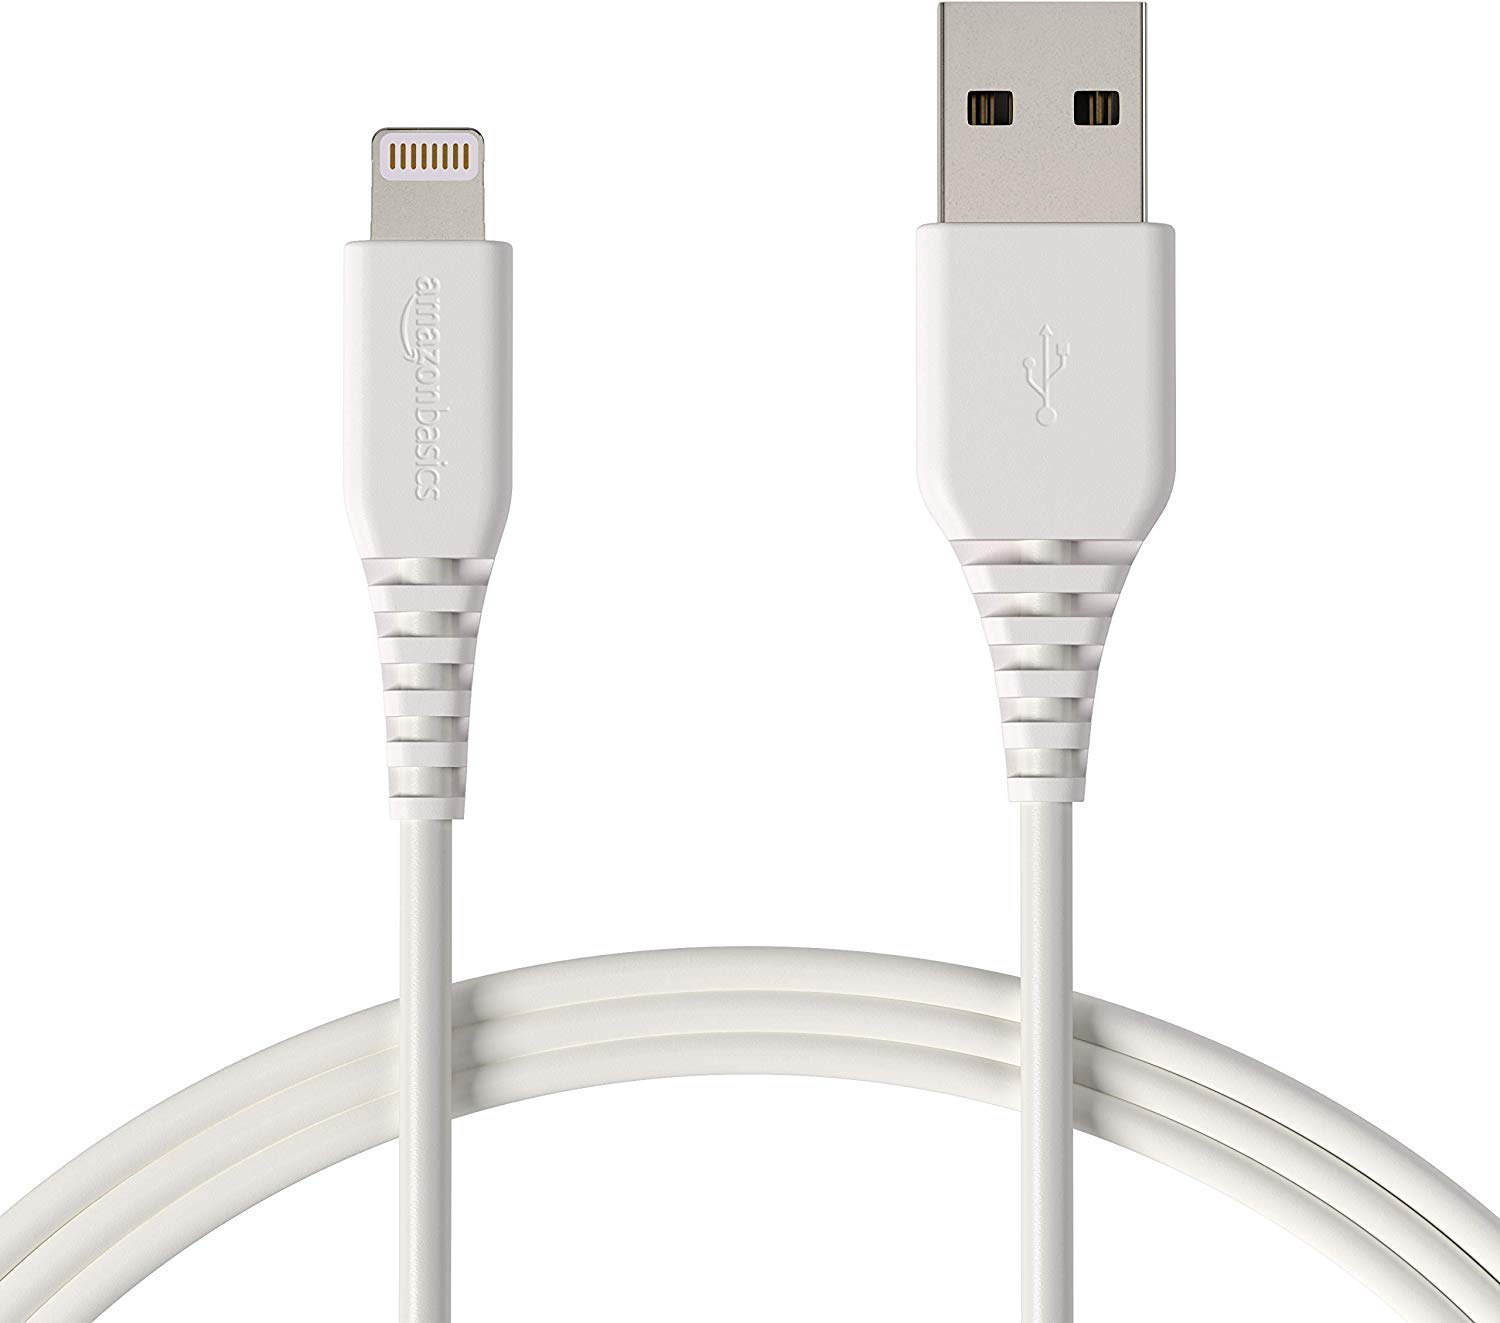 Amazon Basics MFi-Certified Lightning to USB A Cable for Apple iPhone and iPad - 6 Feet (1.8 Meters) - White